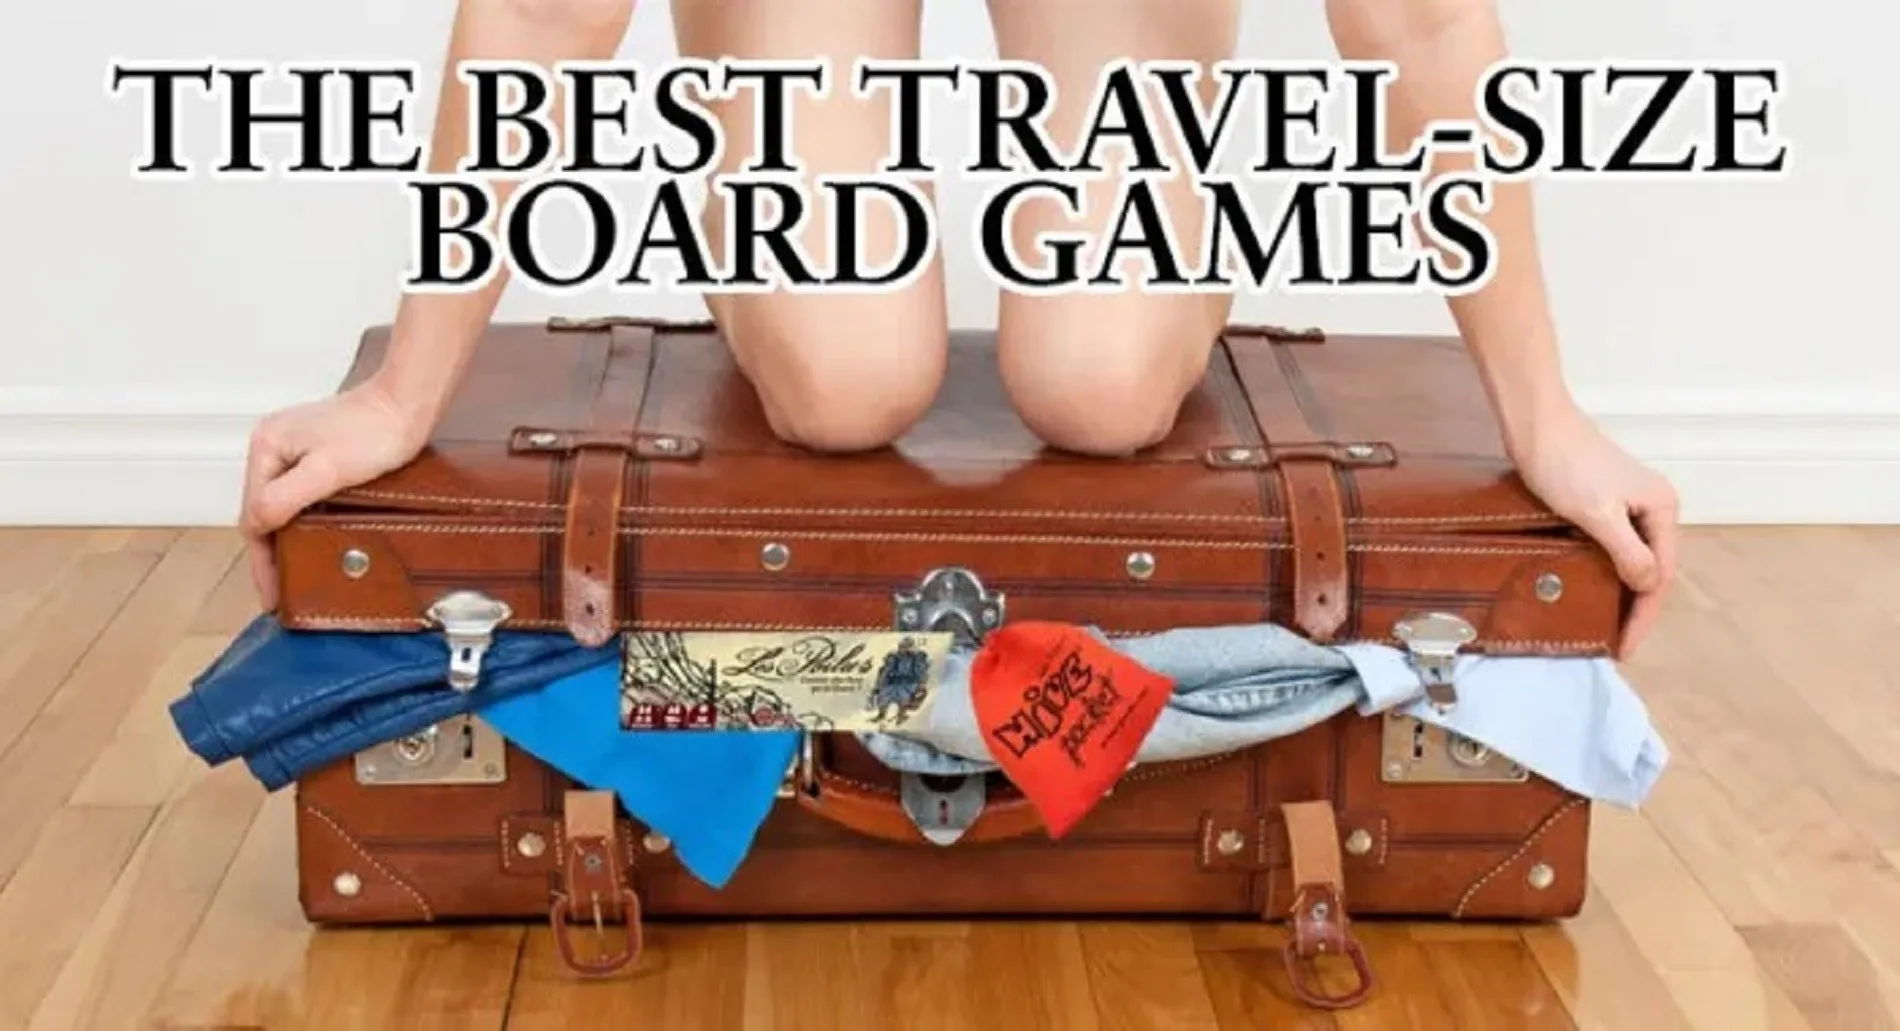 TravelSizeBoardGame - 6 of the Best Travel-Size Board Games and Why You May Want to Pack Them